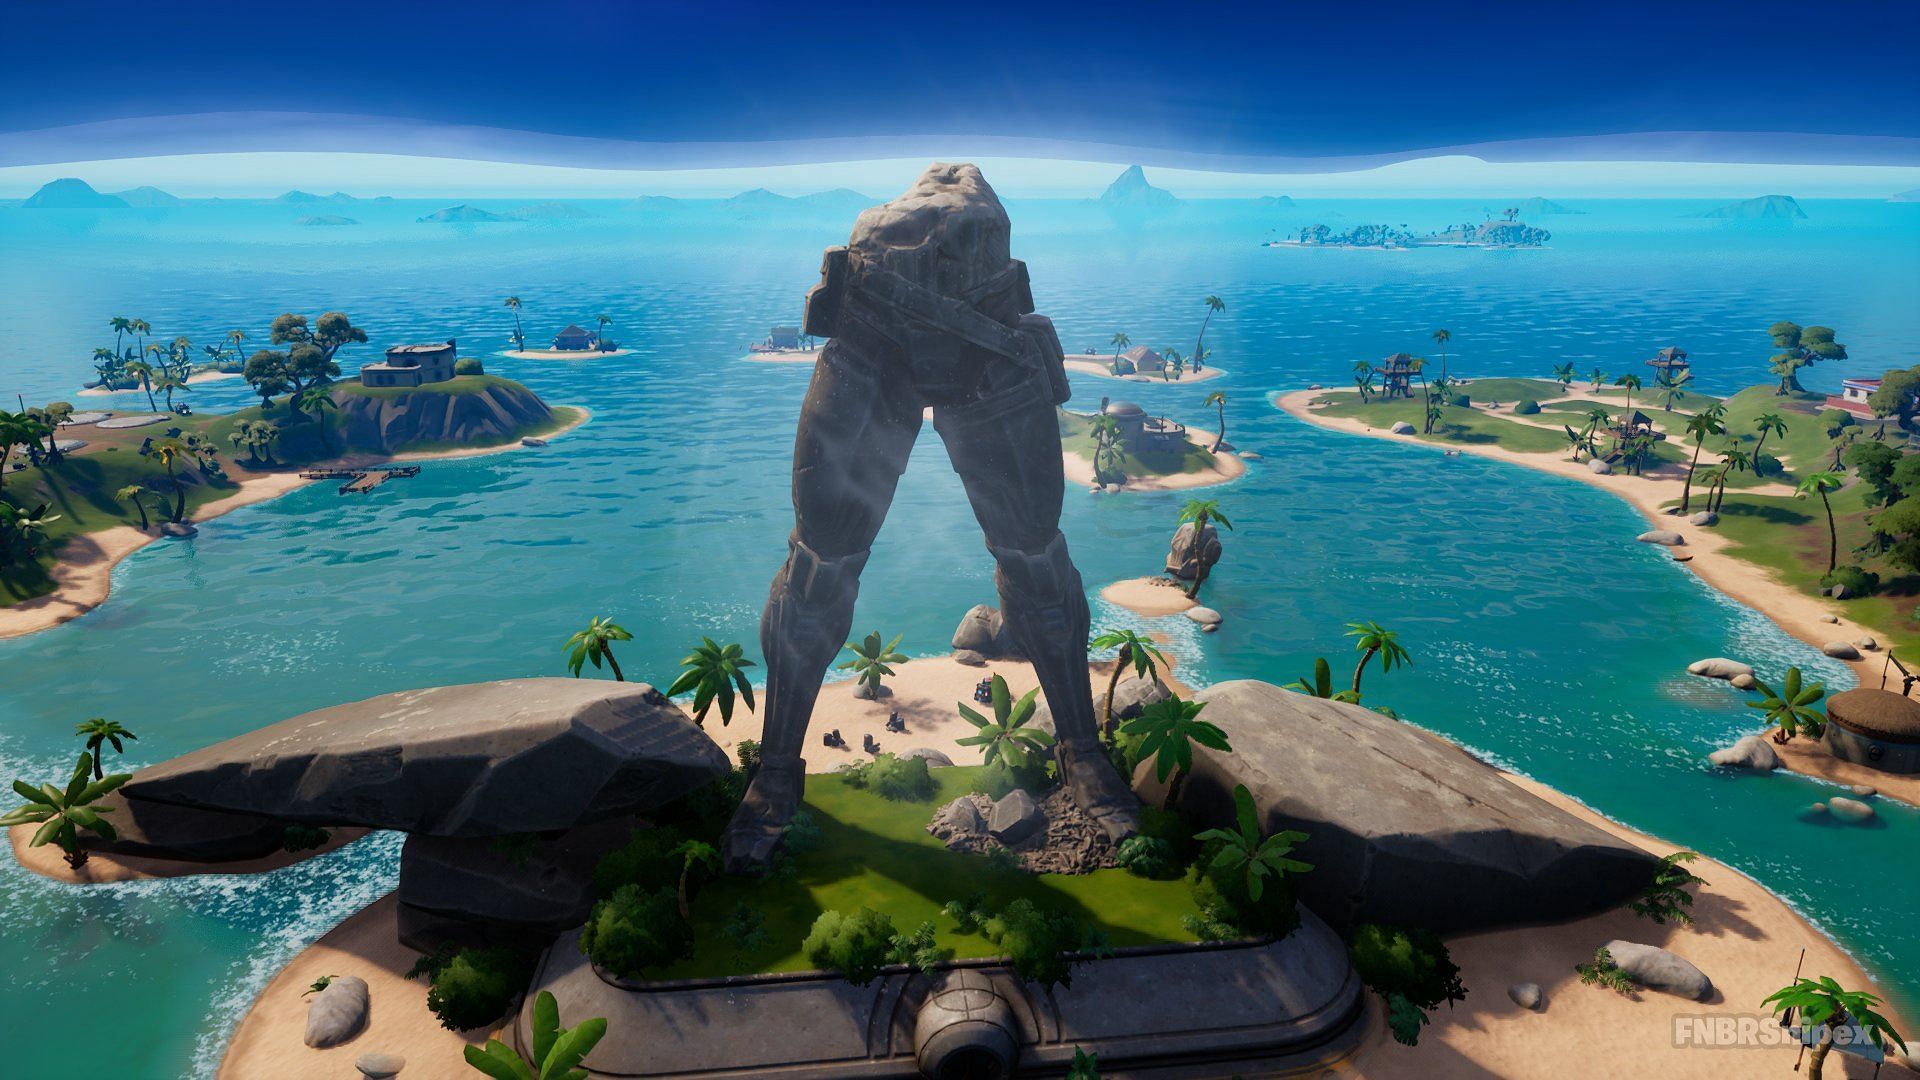 Foundation statue has been destroyed in Fortnite Chapter 3 Season 2 (Image via Snipex/Twitter)